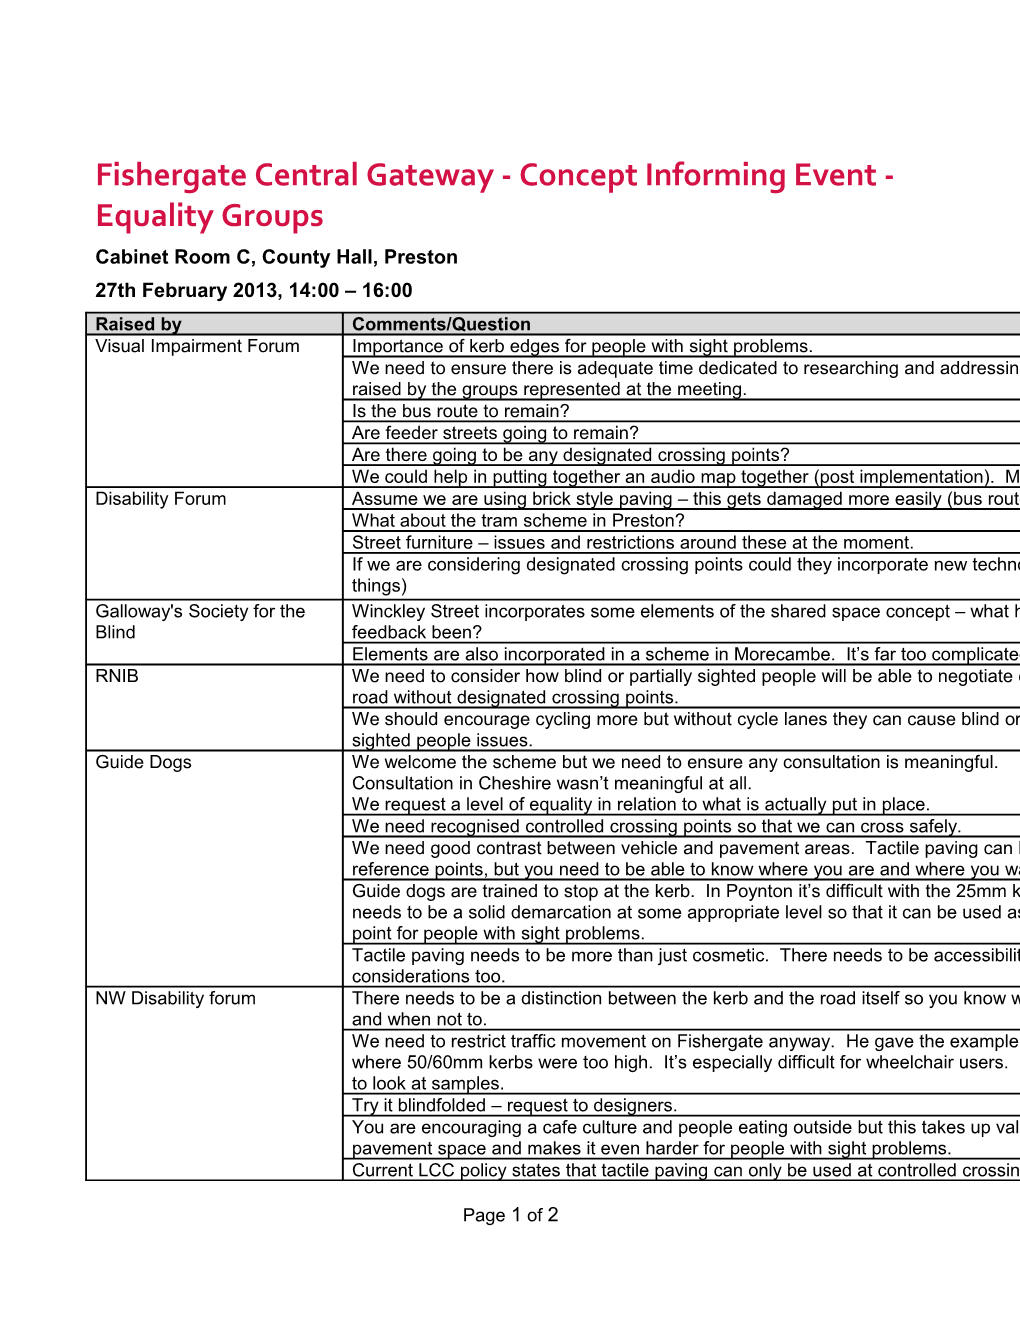 Fishergate Central Gateway - Concept Informing Event - Equality Groups